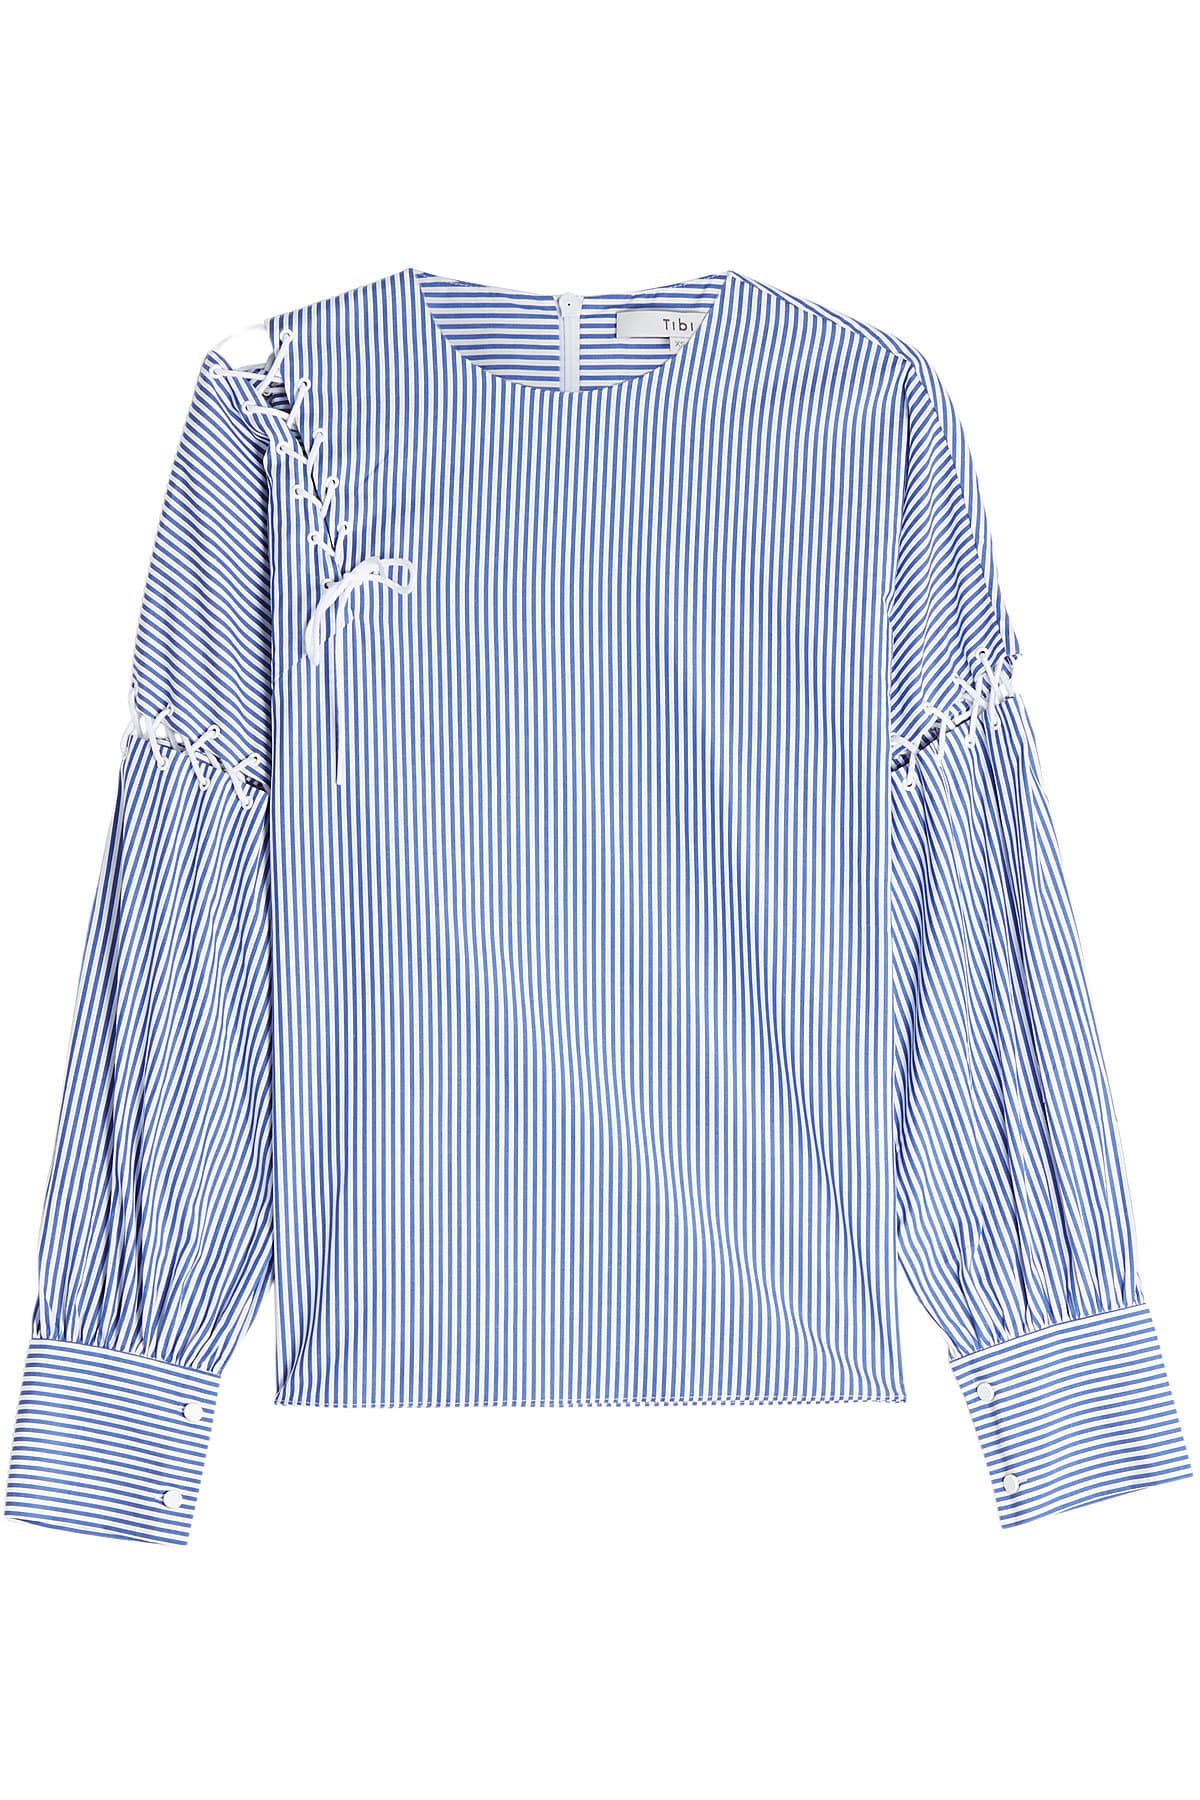 Tibi - Striped Cotton Blouse with Lace-Up Detail